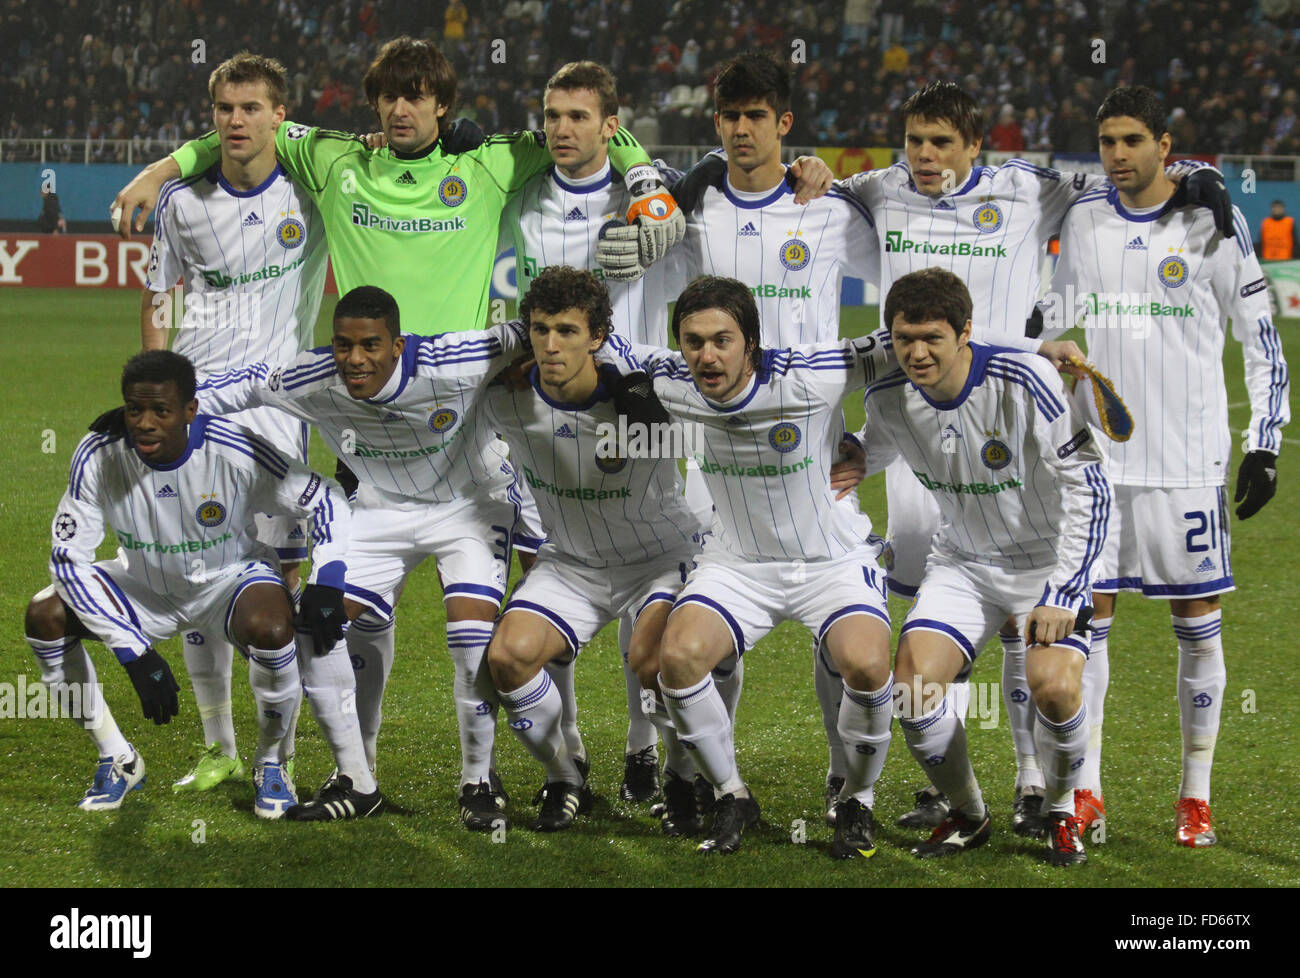 FC Dynamo Kyiv team pose for a group photo before UEFA Champions League football game against FC Barcelona Stock Photo